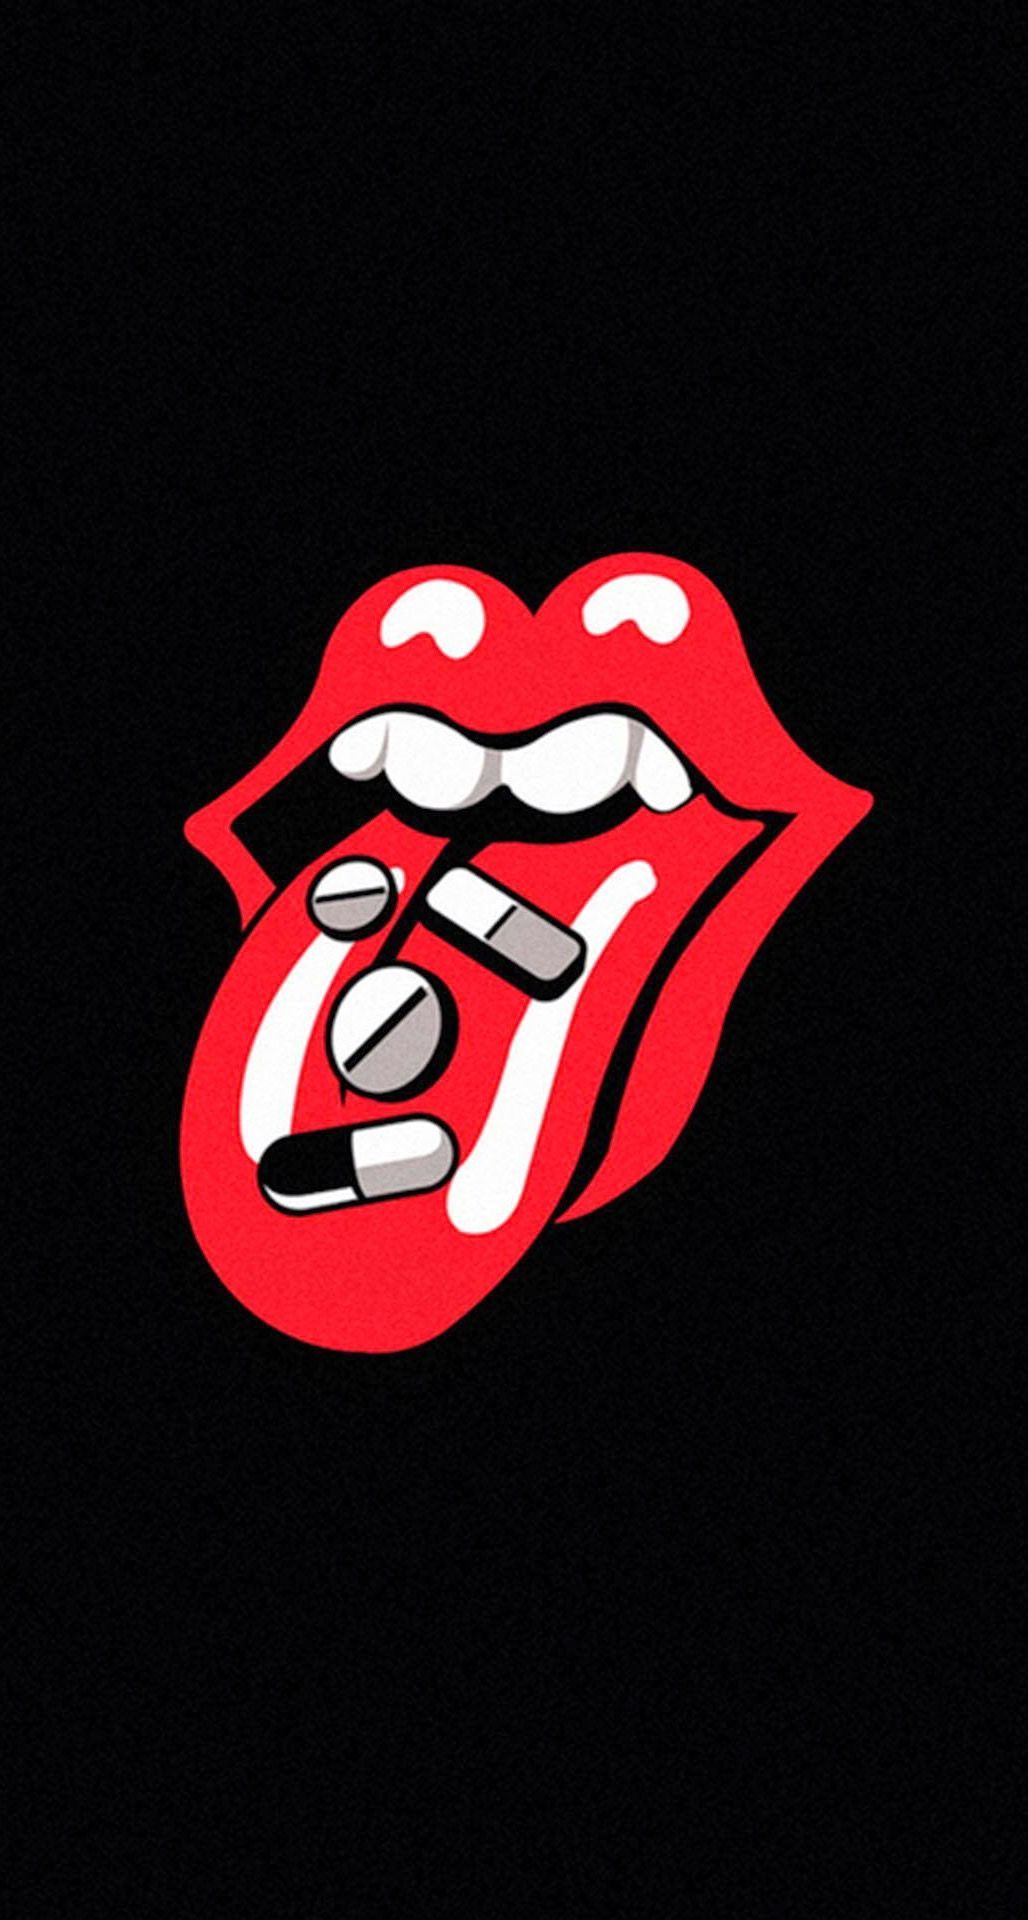 Rolling Stones Tongue Pills Drugs iPhone 6 Plus HD